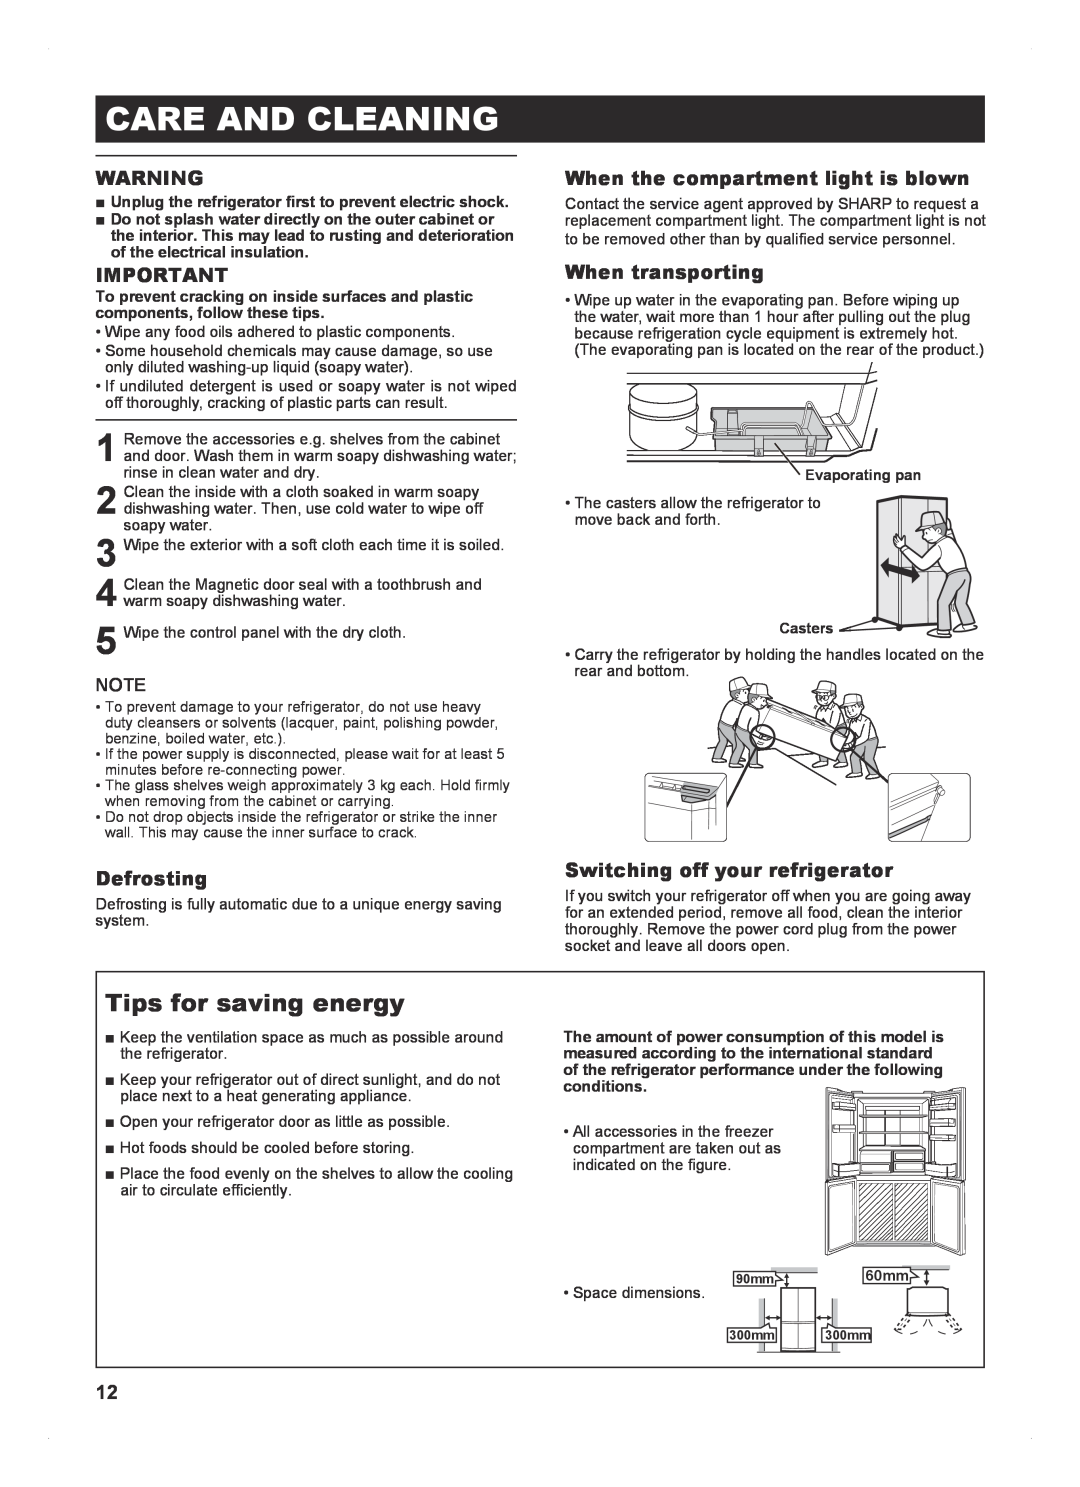 Sharp SJ-FP813V operation manual Care And Cleaning, Tips for saving energy, Defrosting, When the compartment light is blown 